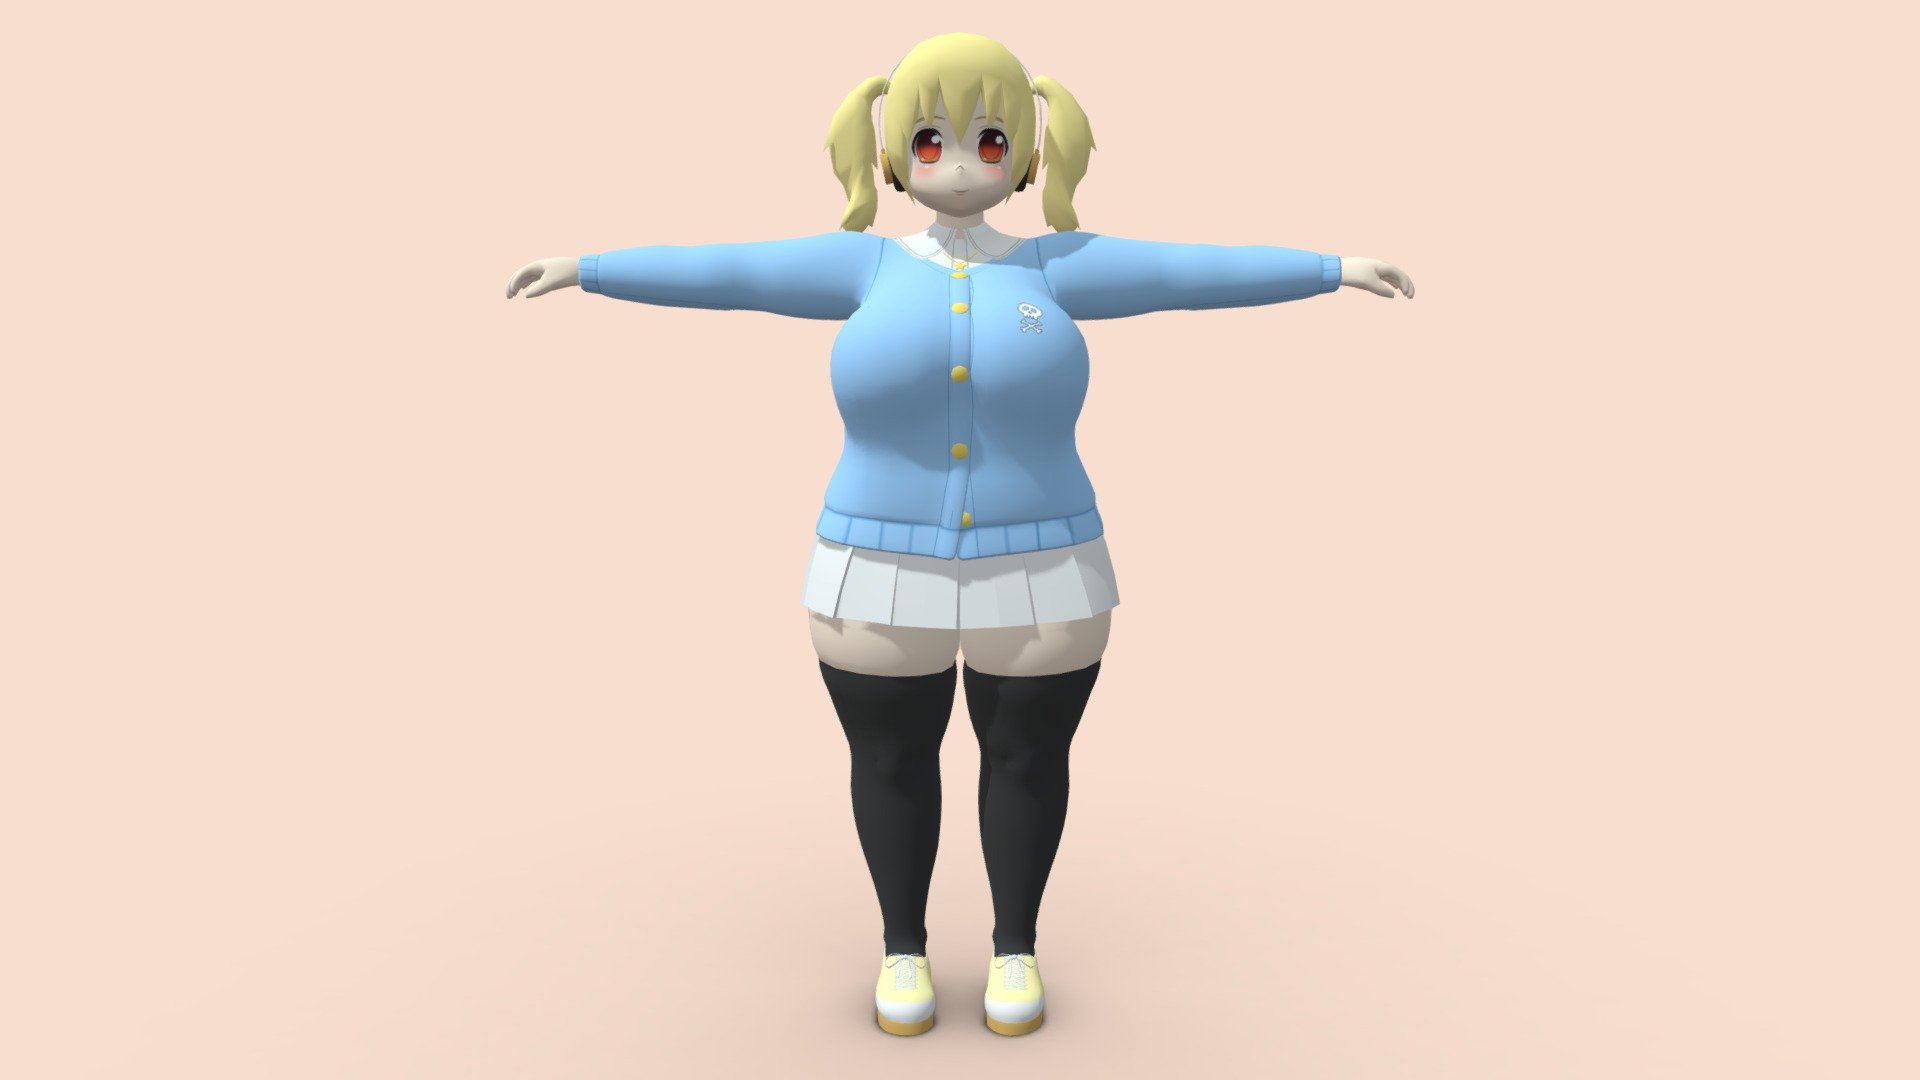 Super Pochaco in her uniform.

Also, if you play Cities: Skylines, you can download her from the workshop and have her as a citizen in your city: https://steamcommunity.com/sharedfiles/filedetails/?id=2886458136 - Super Pochaco Uniform - 3D model by Nosh59 3d model